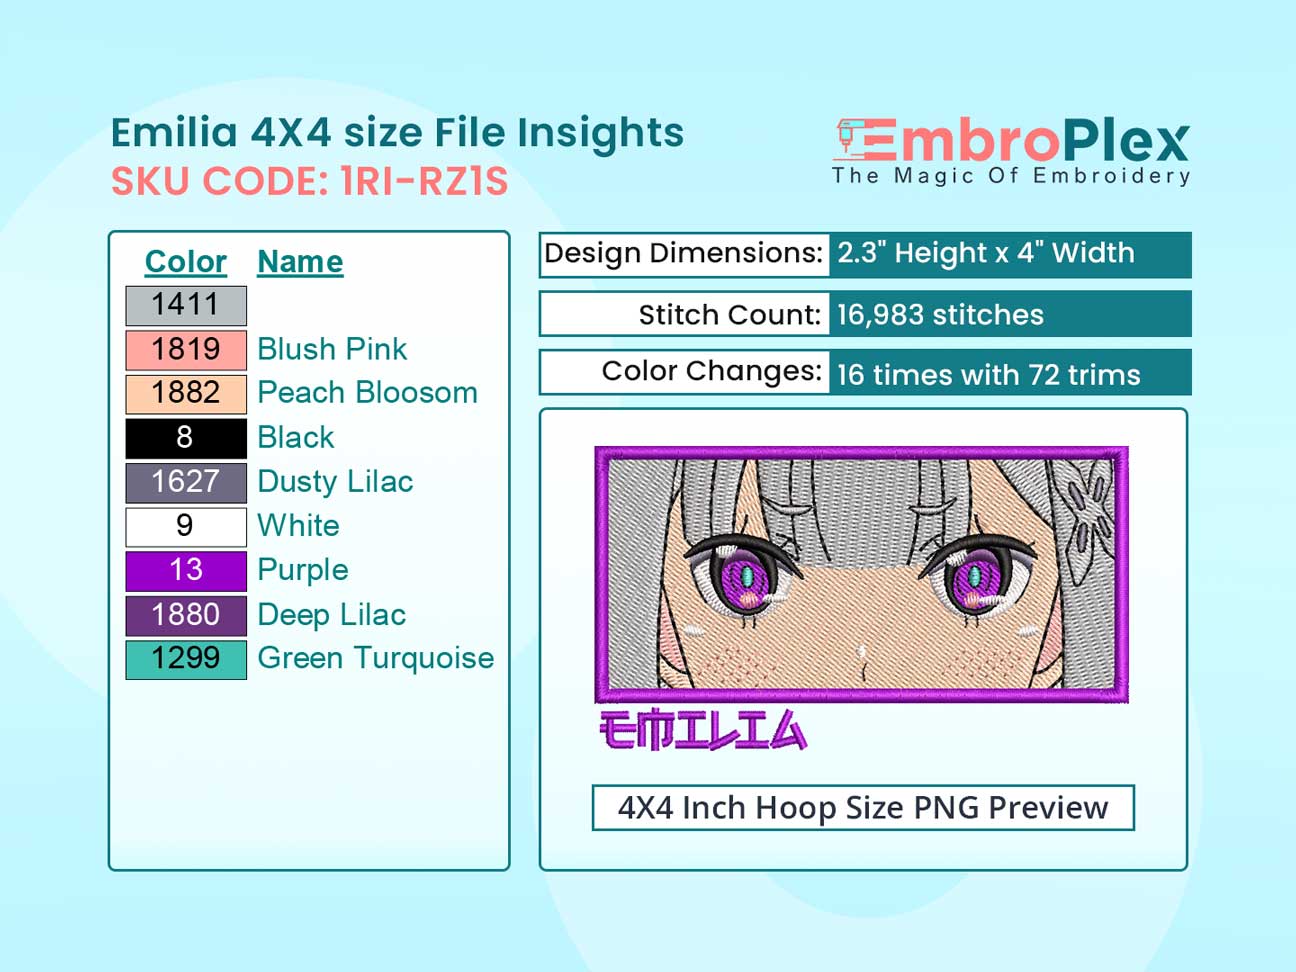 Anime-Inspired Emilia Embroidery Design File - 4x4 Inch hoop Size Variation overview image